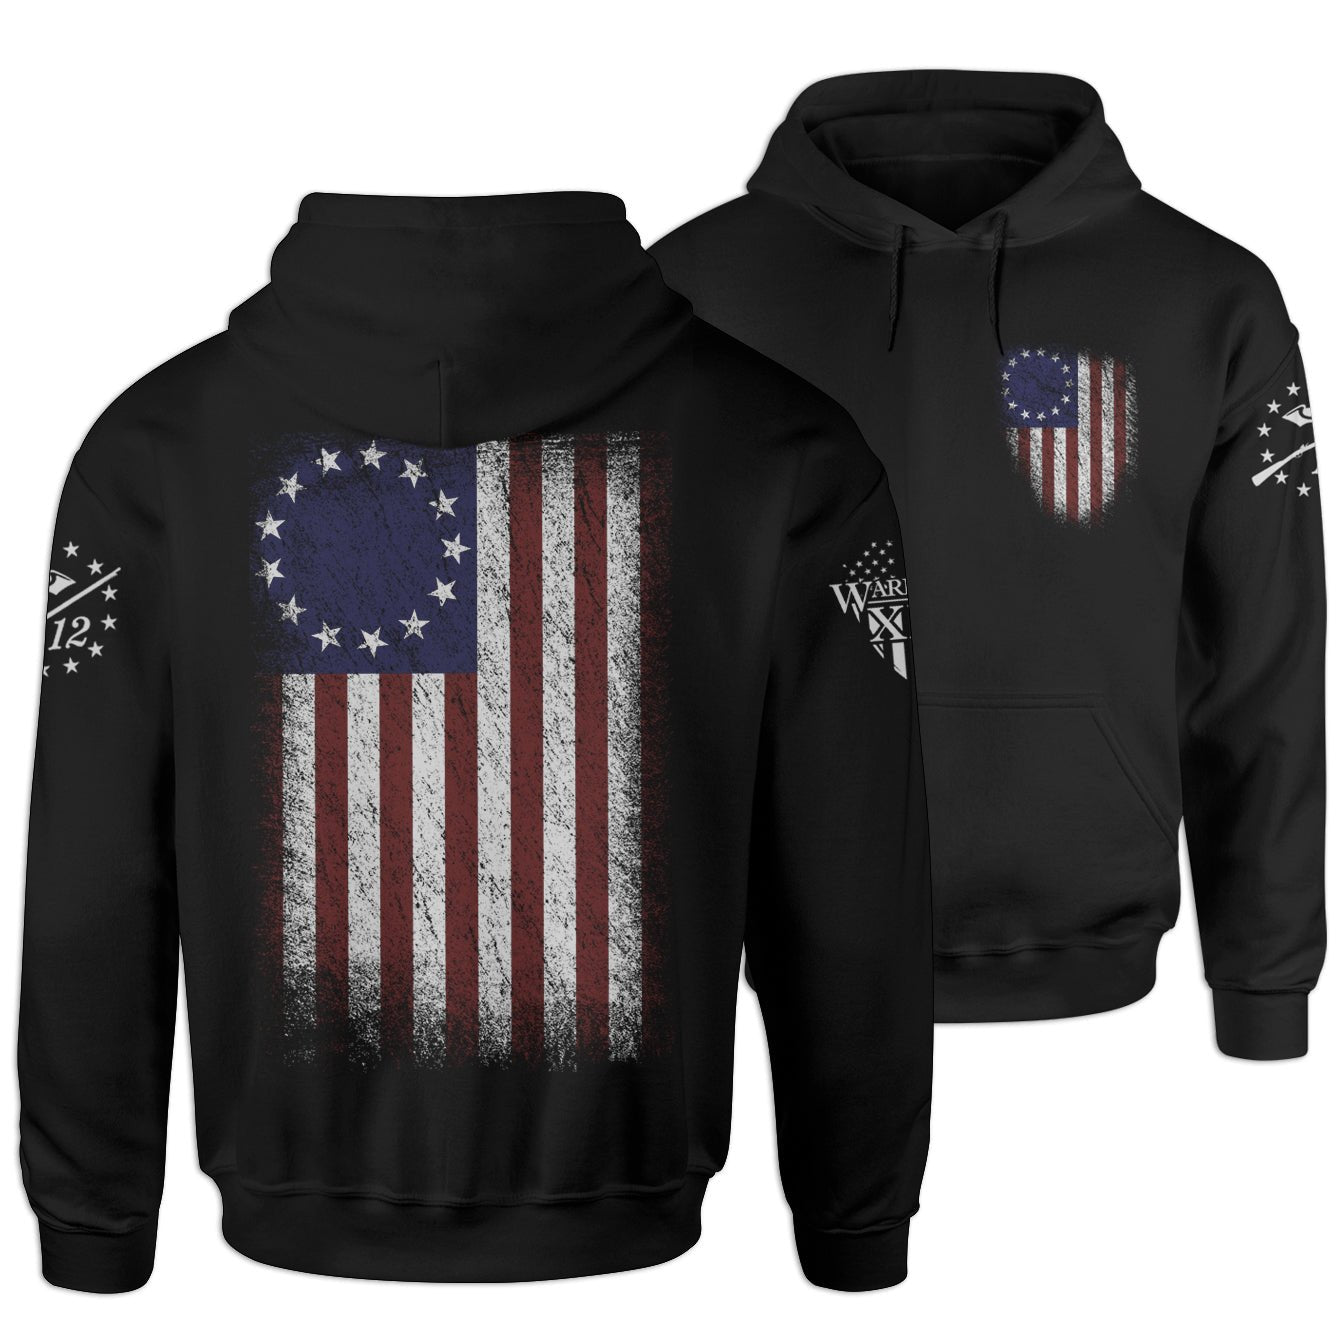 Warrior 12 - Betsy Ross Flag Hoodie - Angler's Pro Tackle & Outdoors